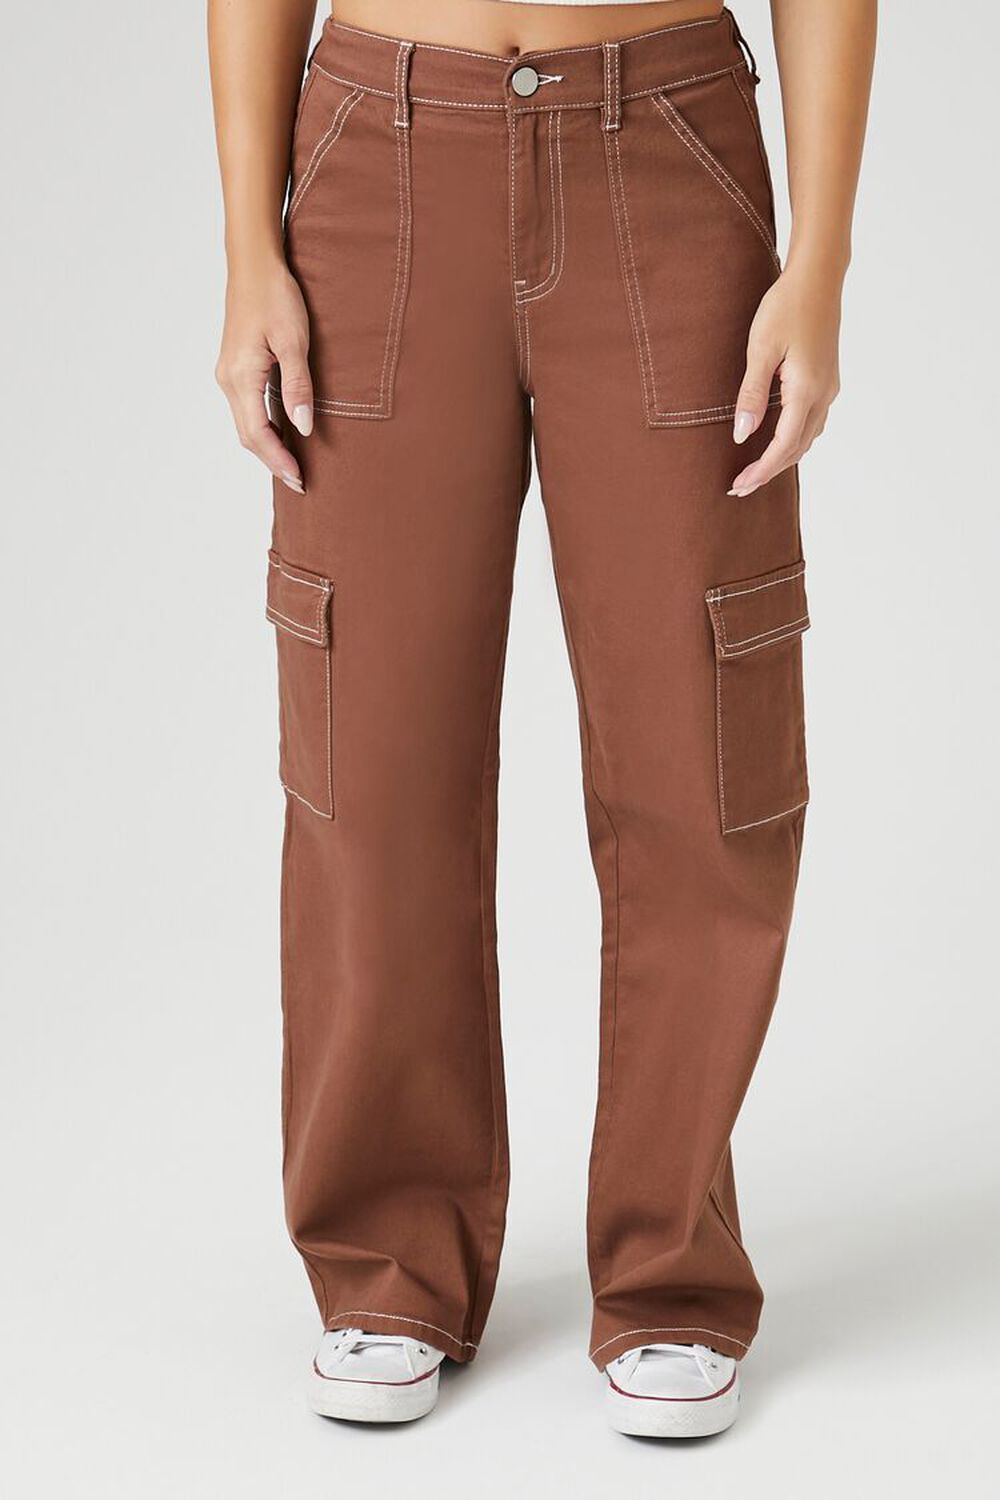 BROWN Twill Cargo Pants, image 2